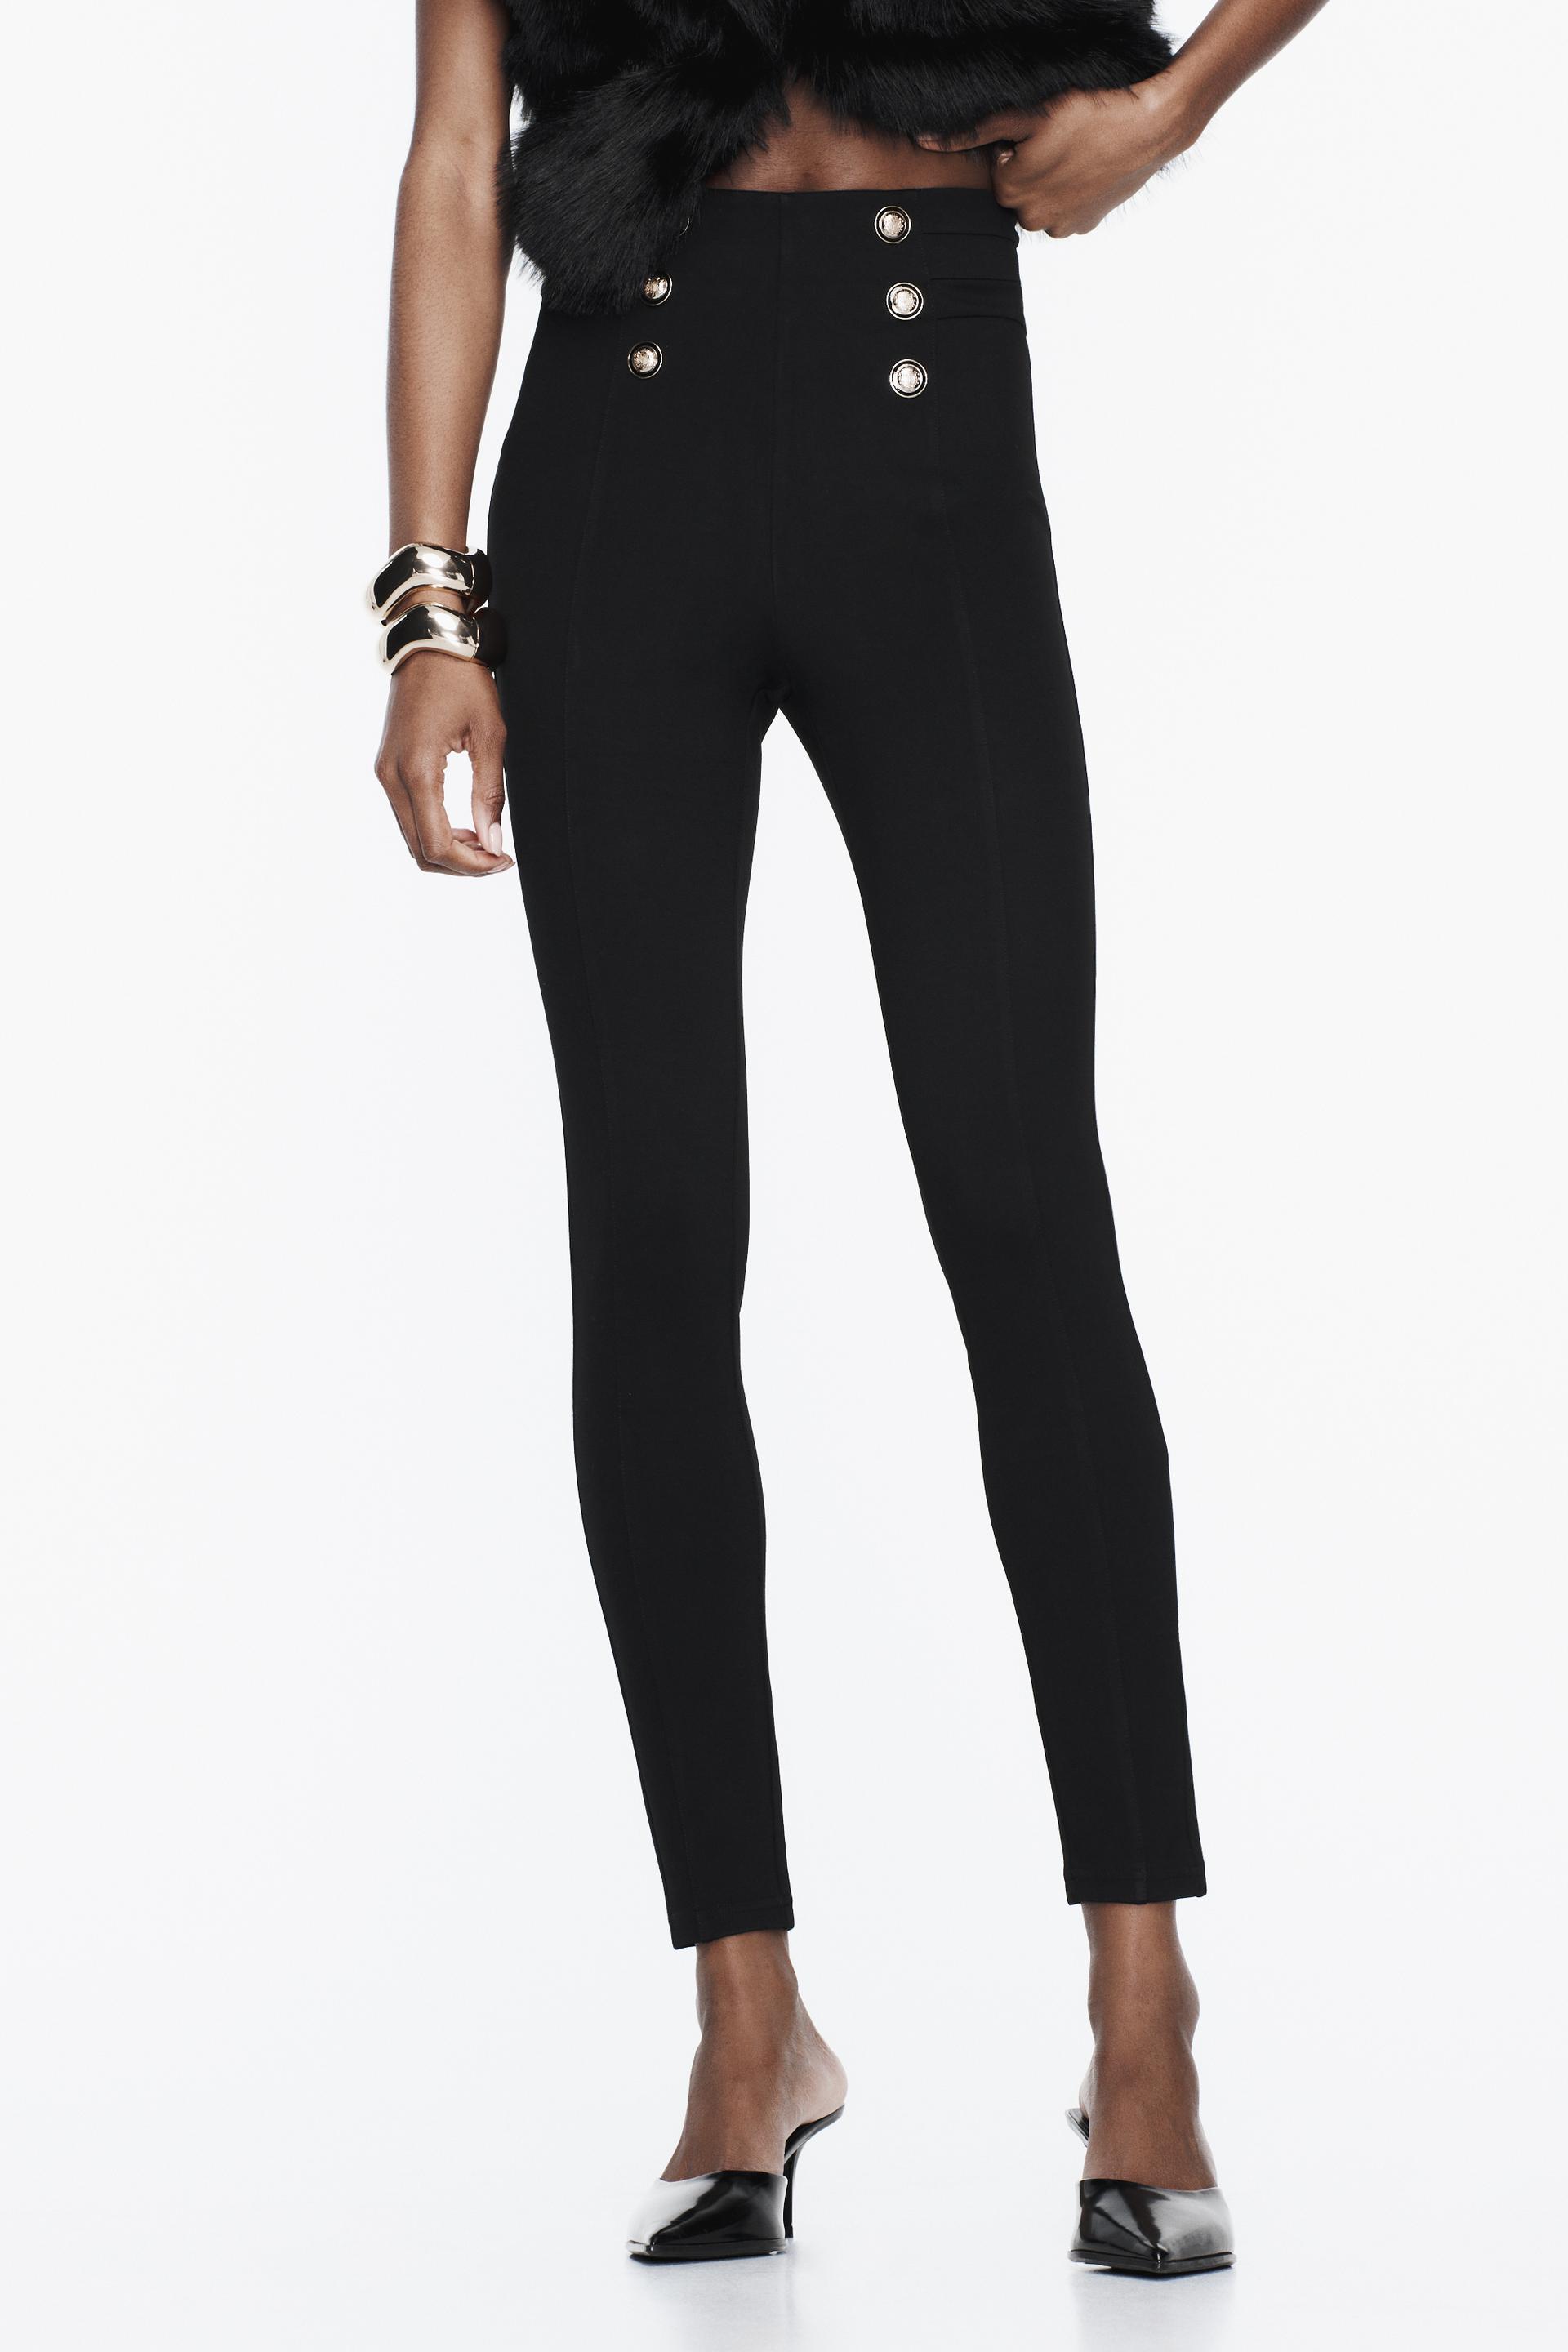 ZARA Leather Leggings Black Size L - $30 (14% Off Retail) New With Tags -  From Sarah